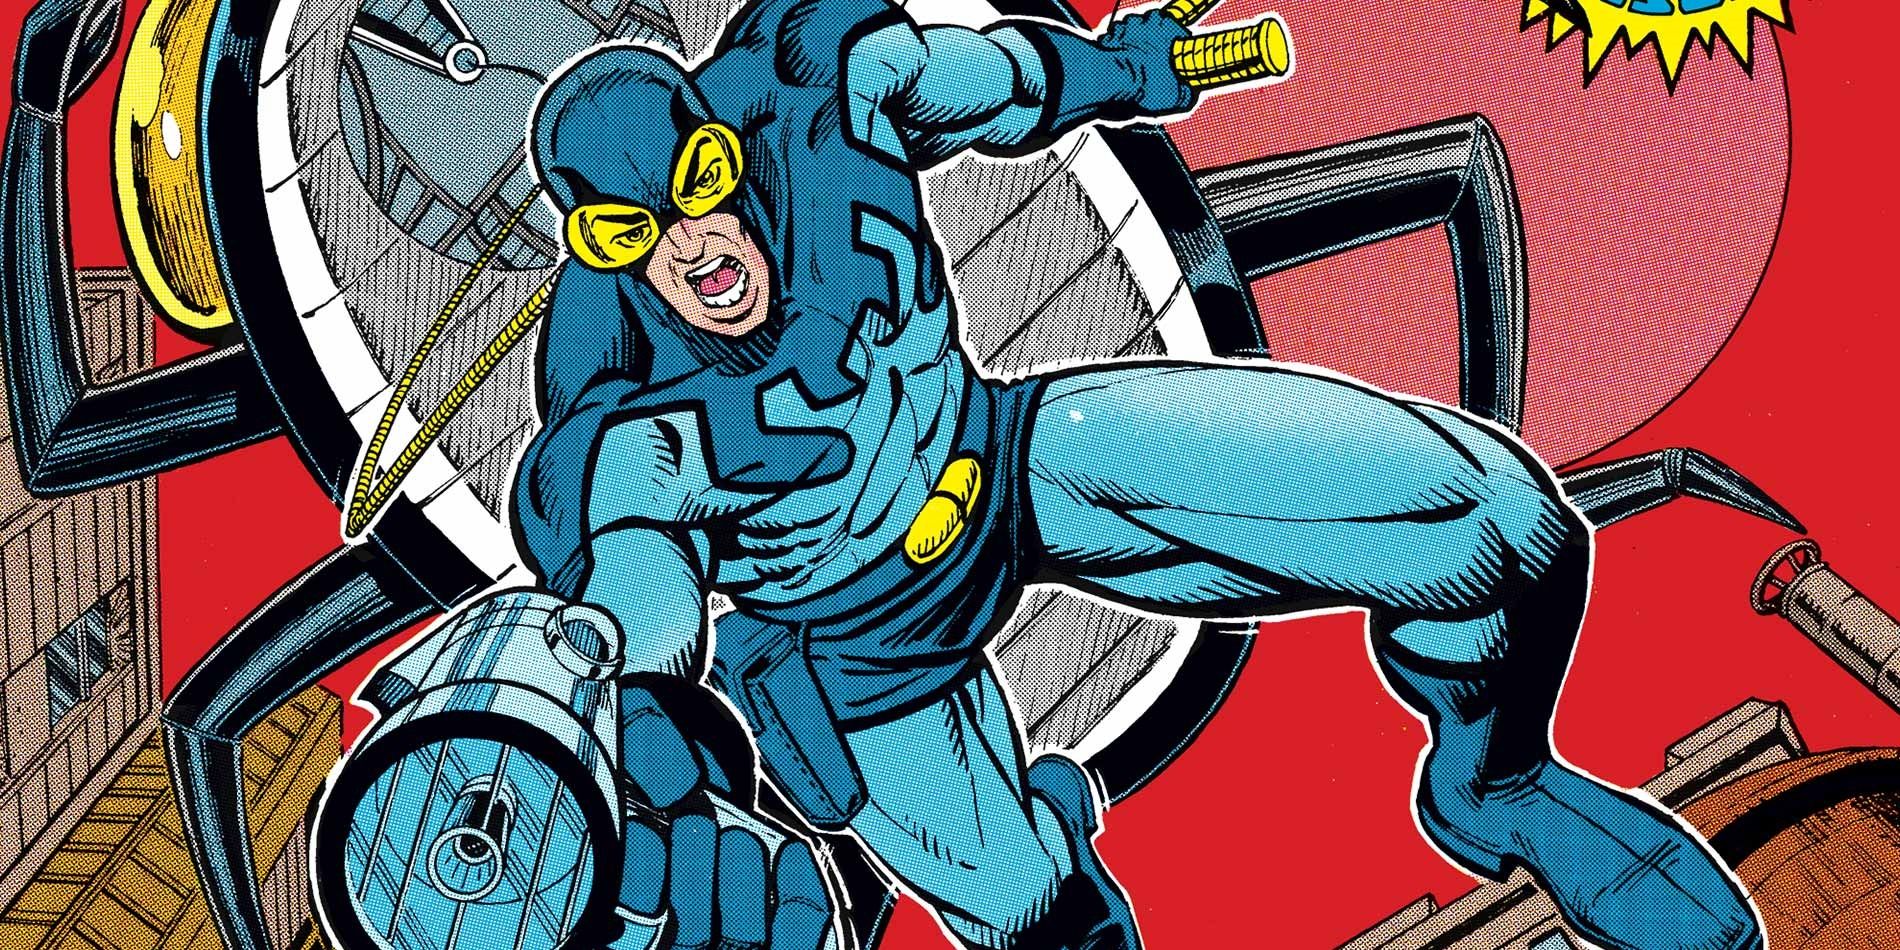 Ted Kord Blue Beetle from DC Comics